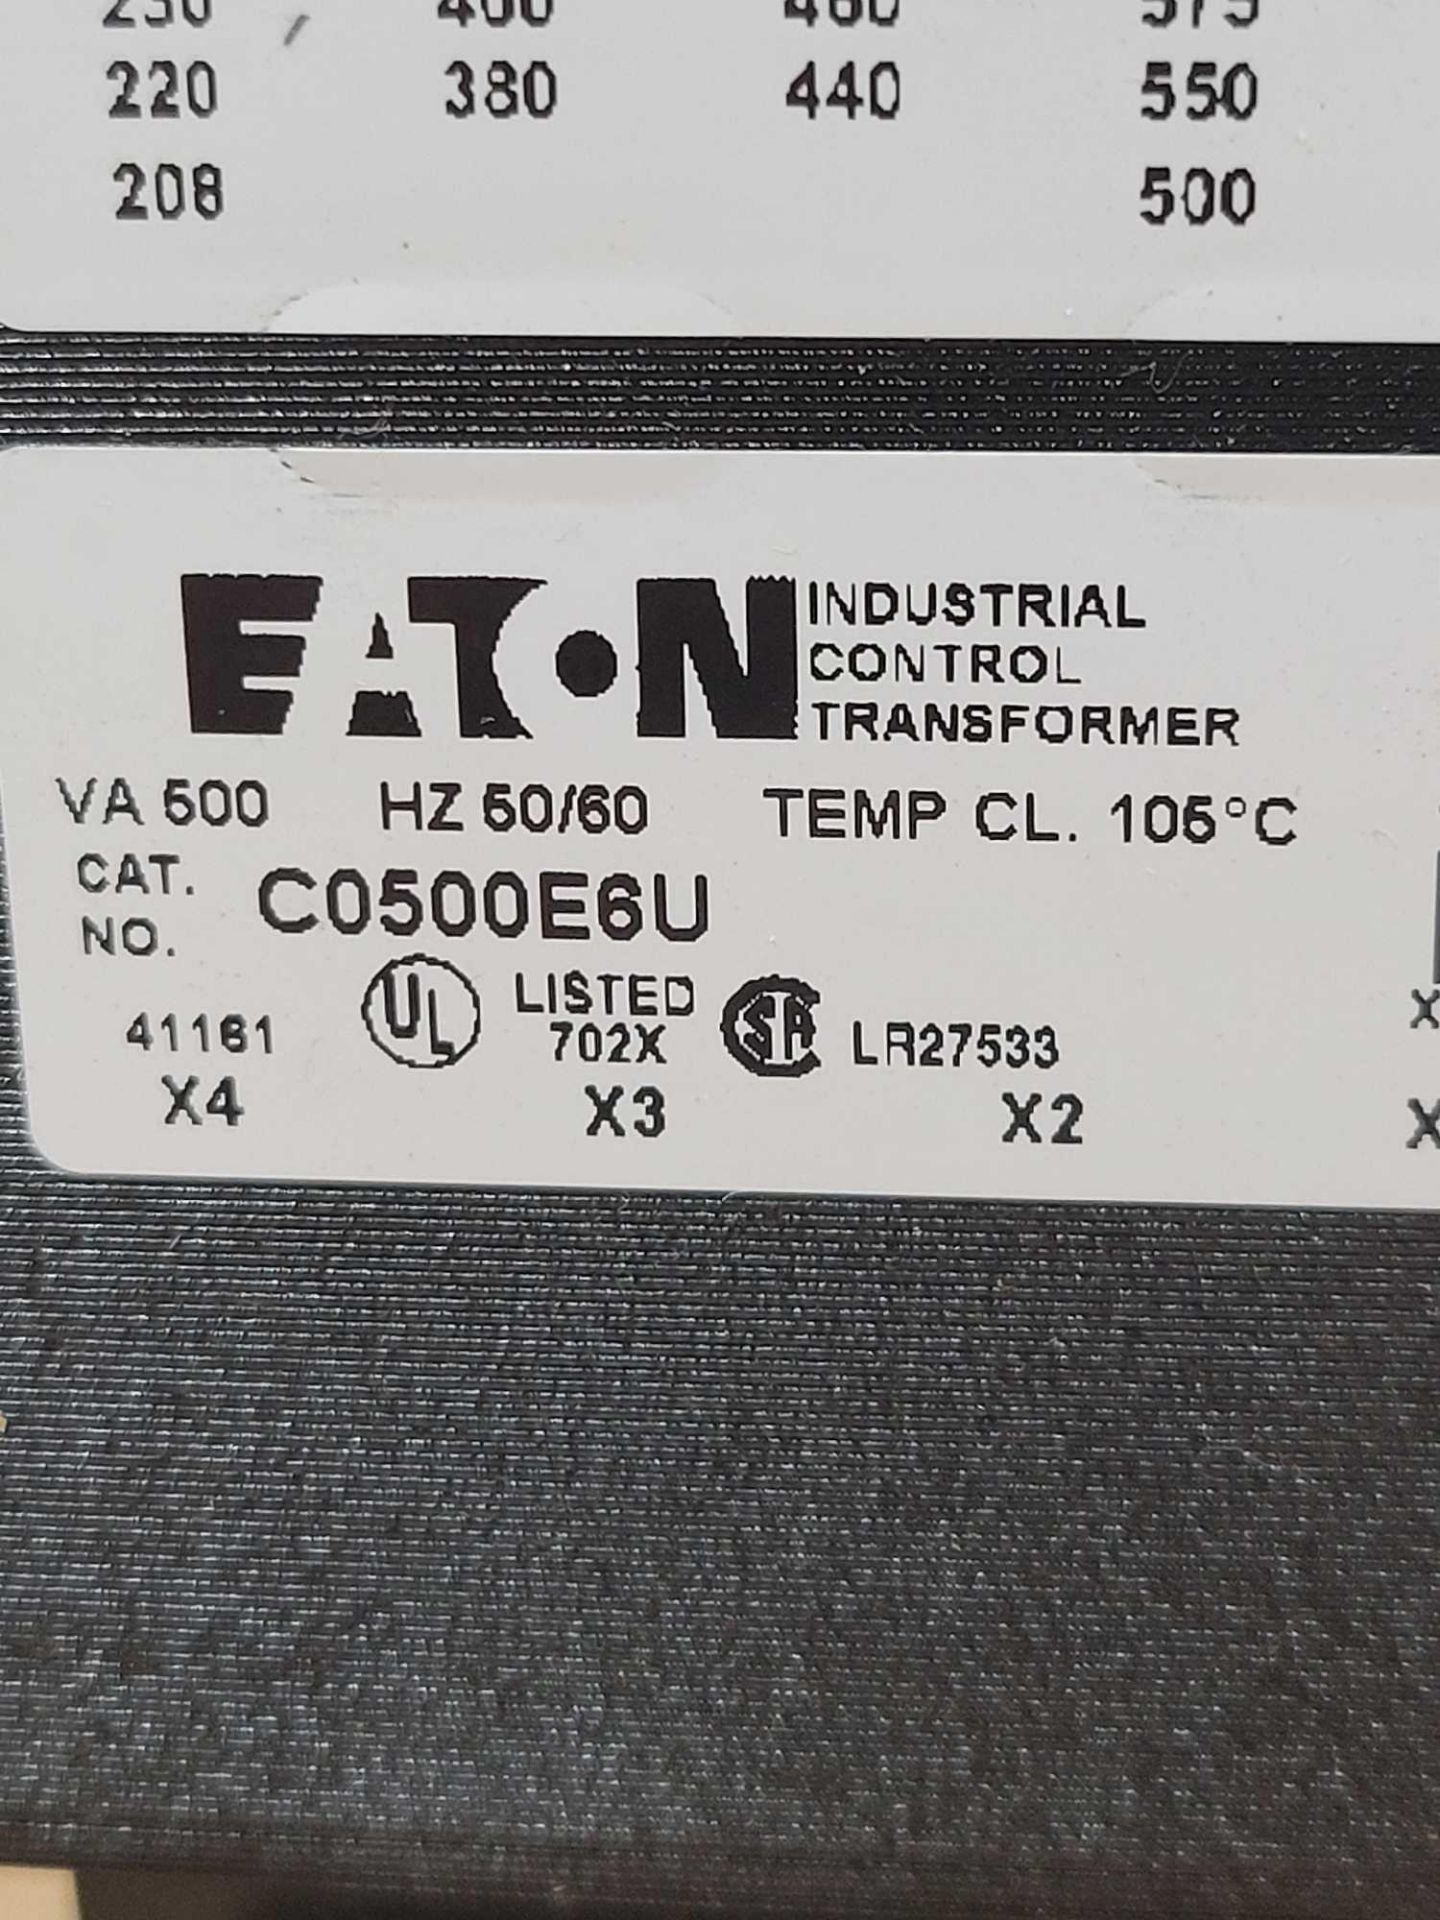 LOT OF 2 EATON C0500E6U / Industrial Control Transformer  /  Lot Weight: 49.0 lbs - Image 3 of 7